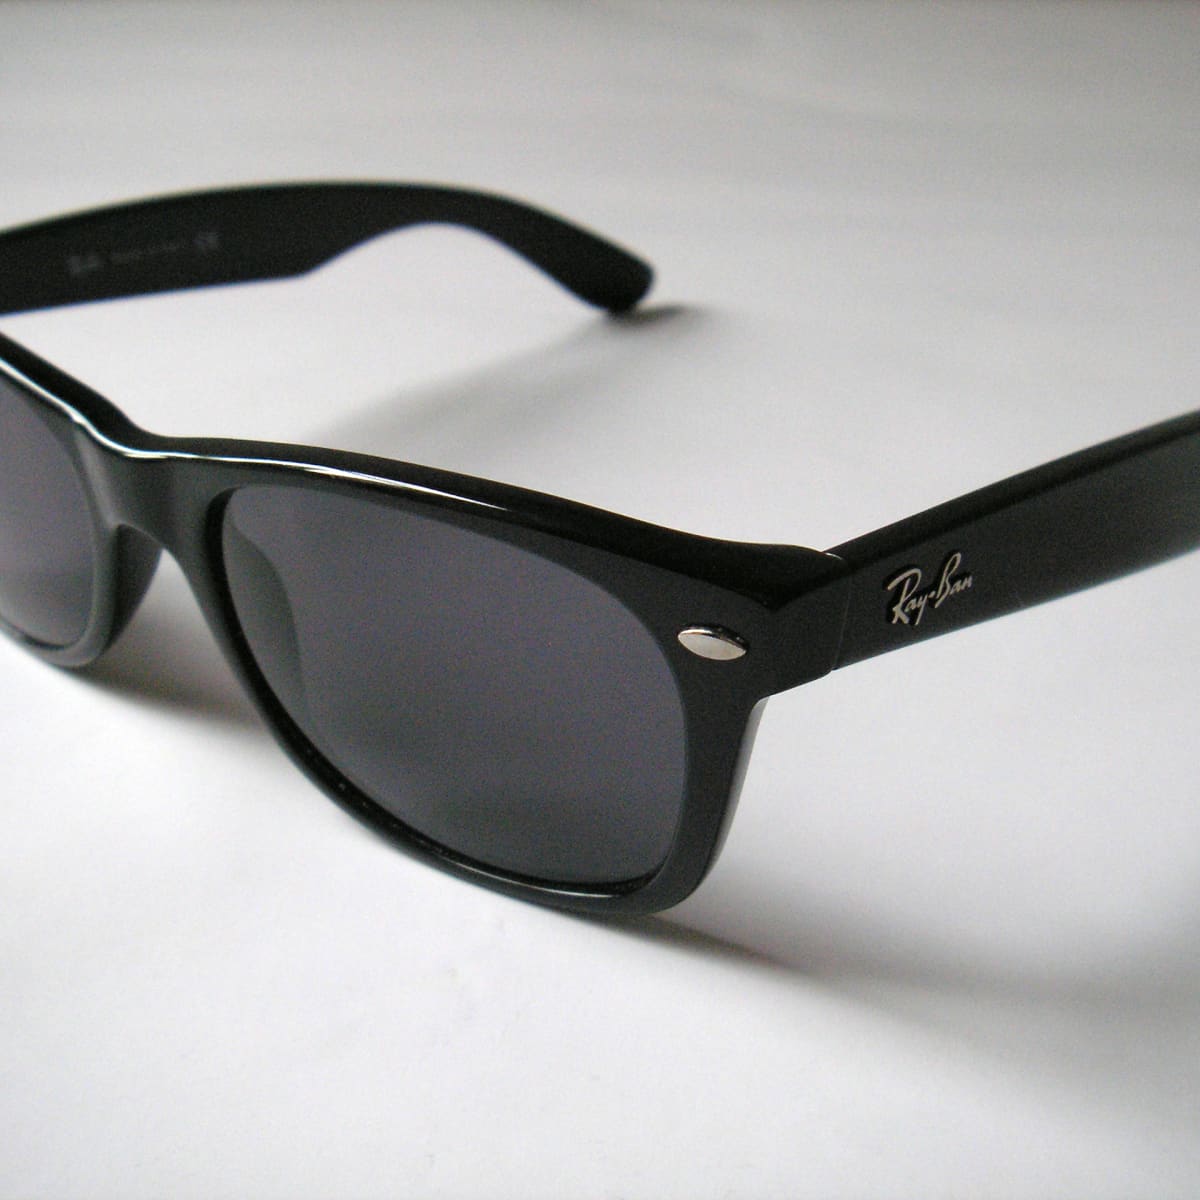 Ray Ban Sunglass Styles and Protection From Ultraviolet Rays - Bellatory